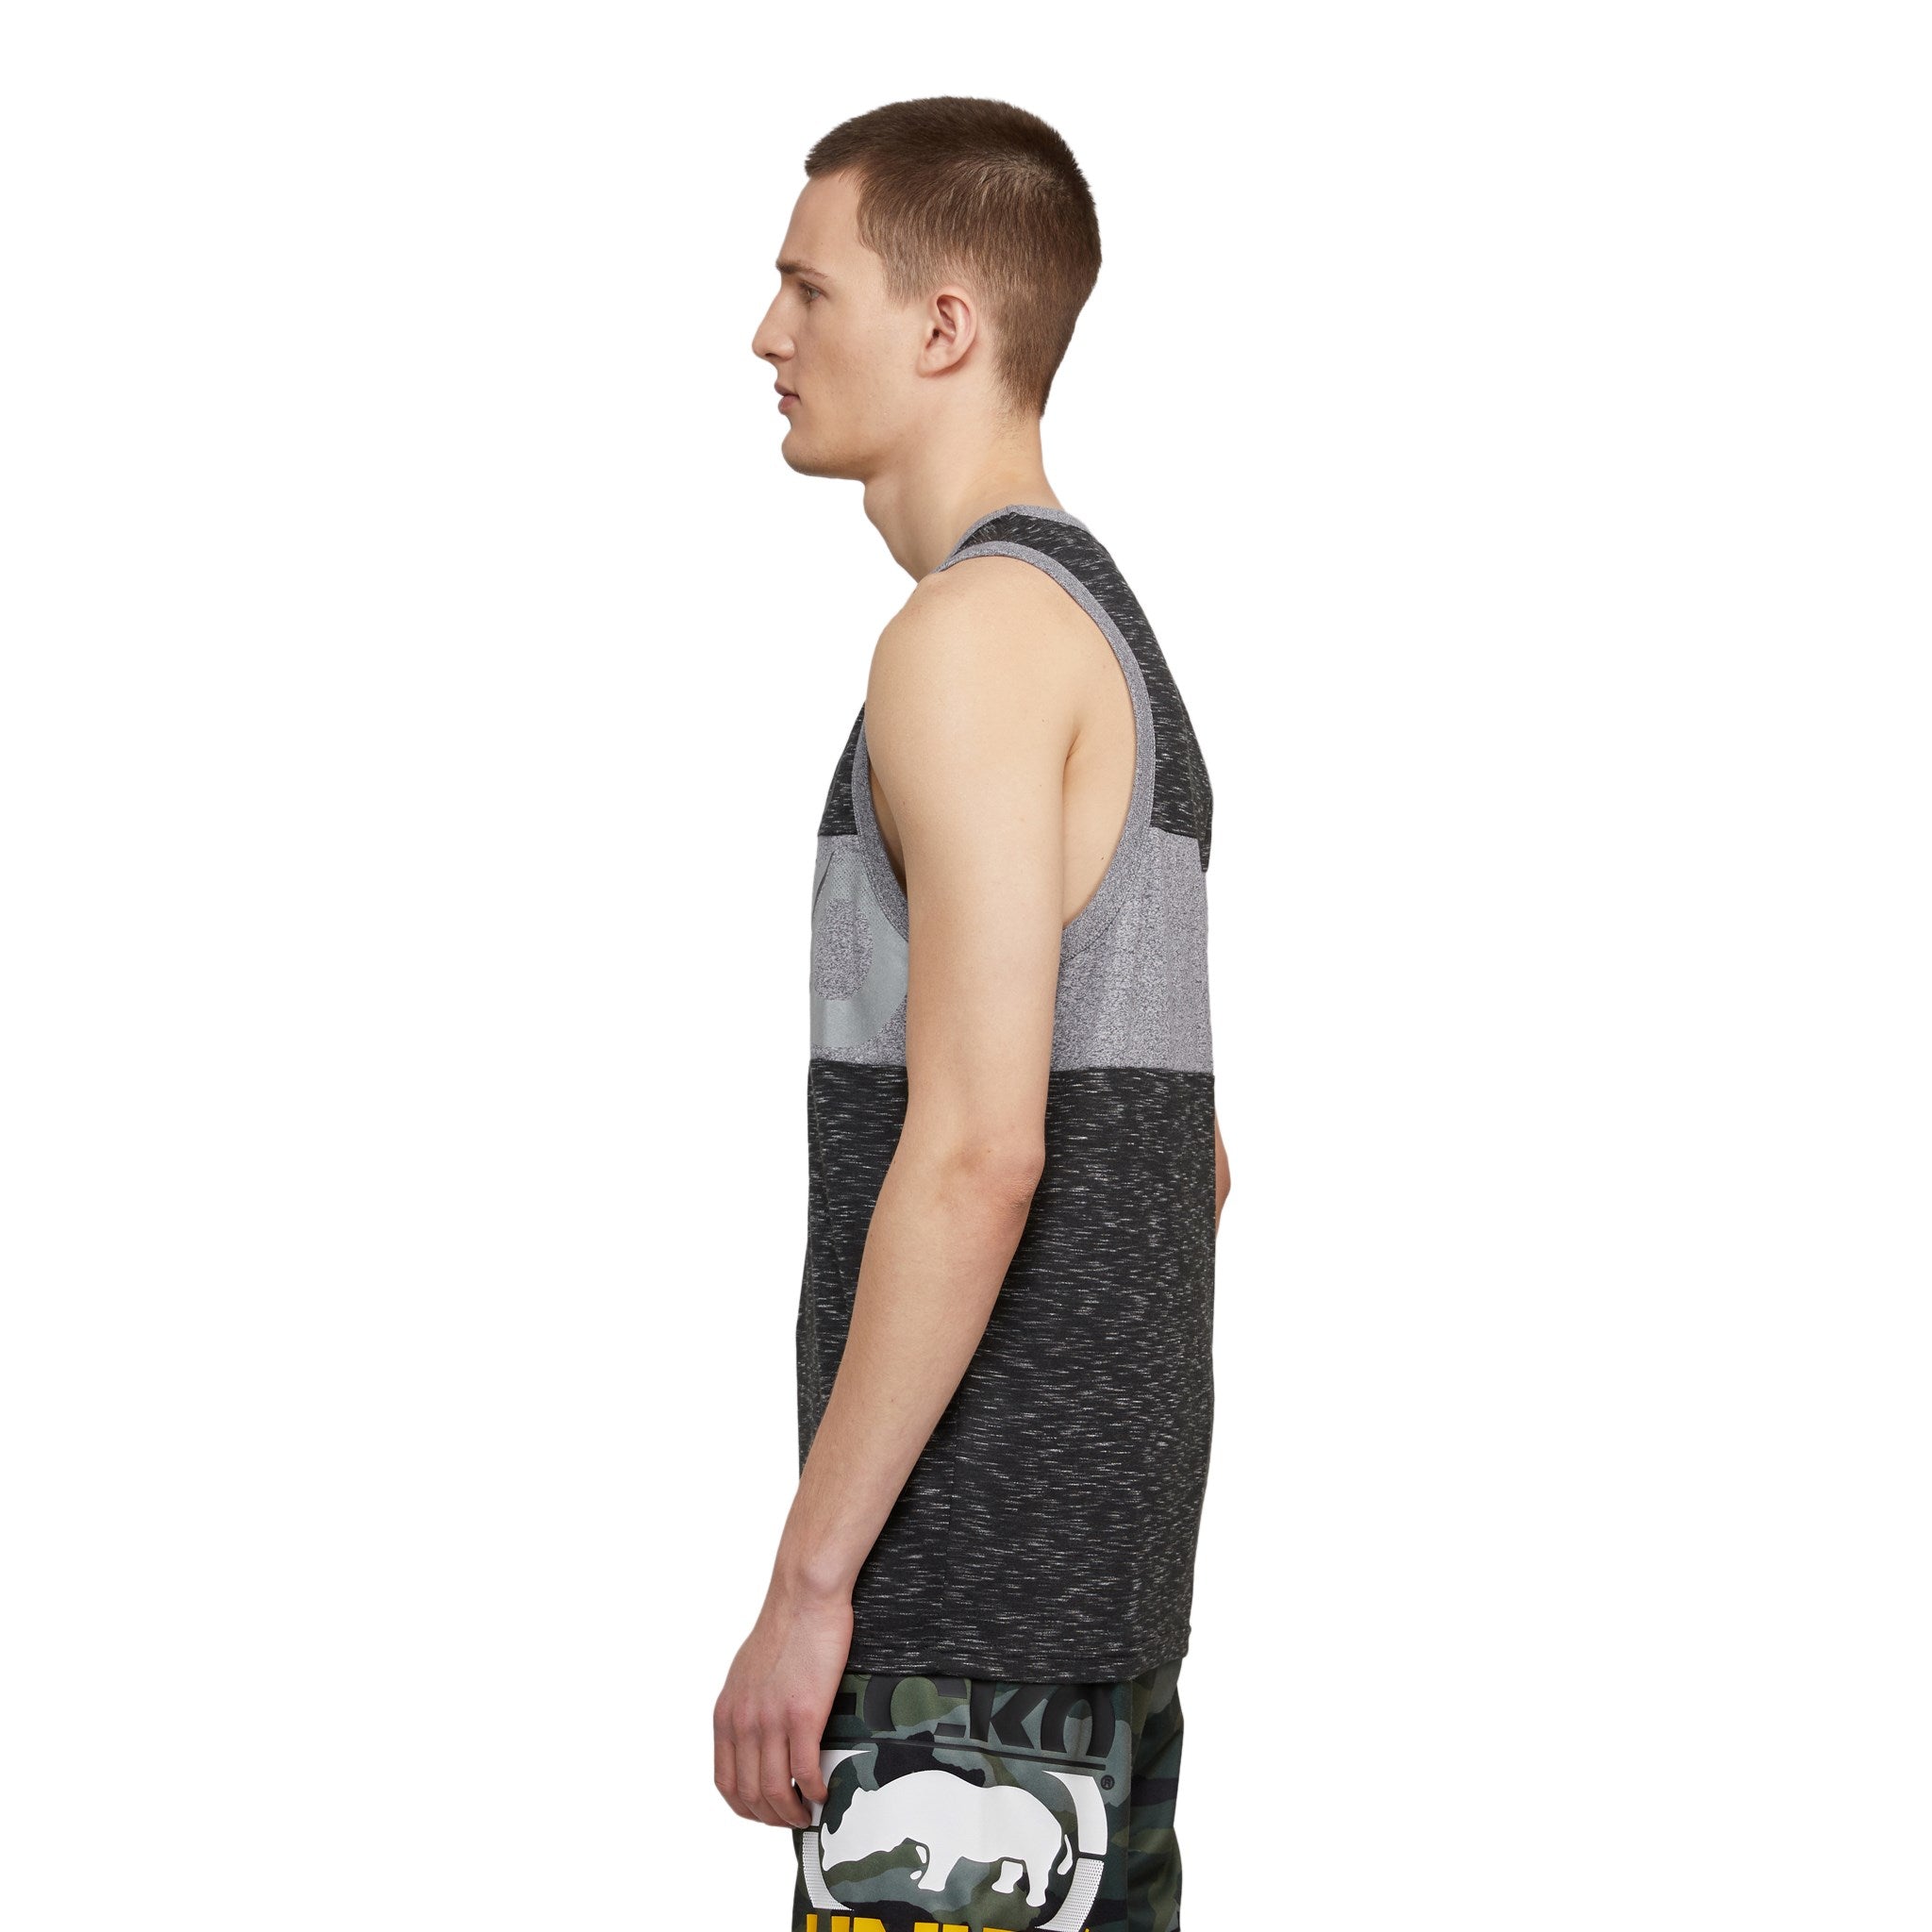 Chest Band Tank top